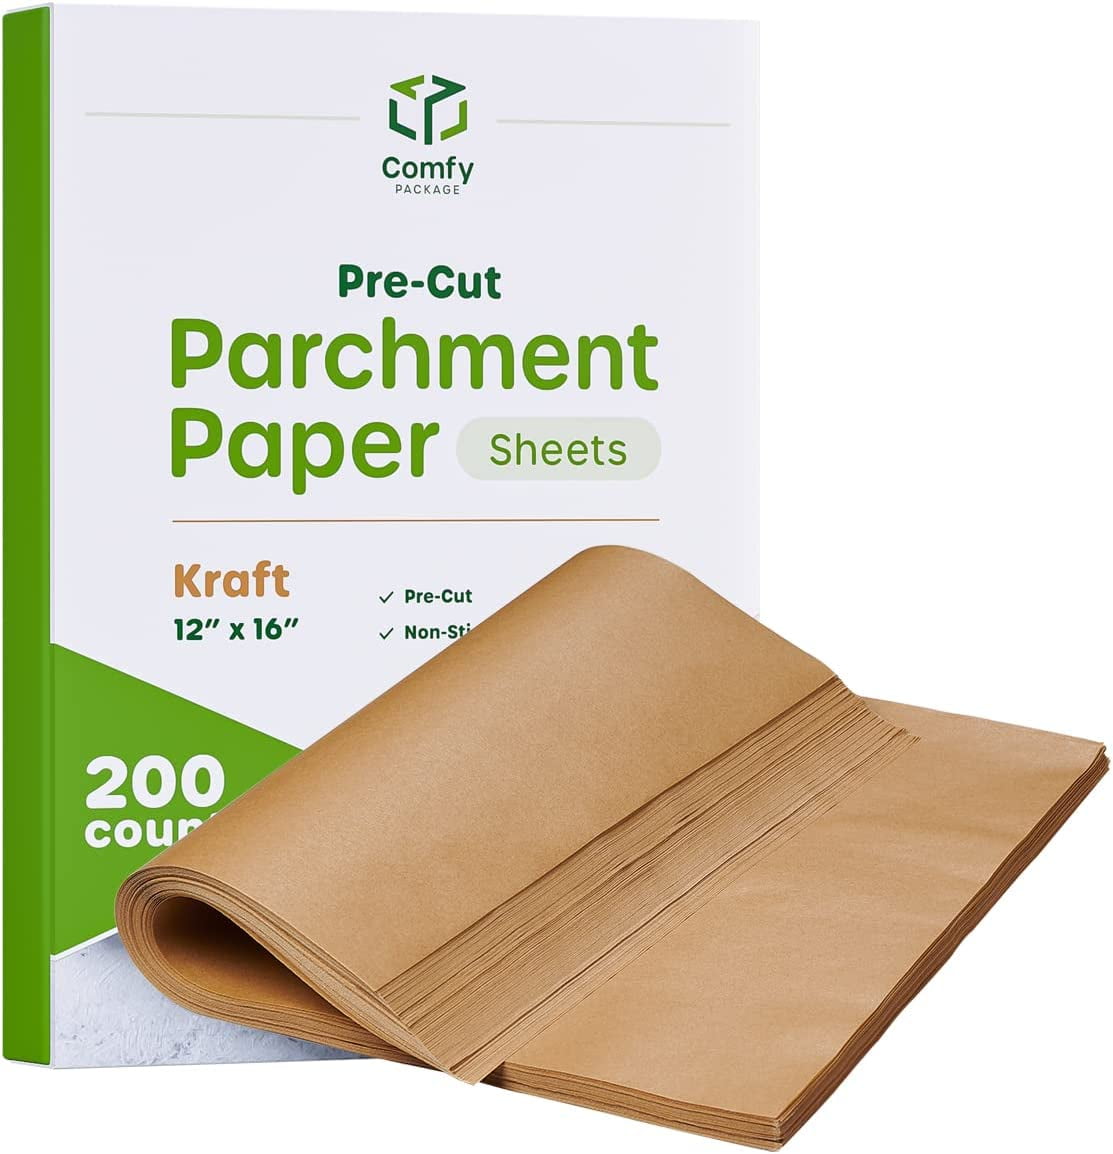 Just.Find.Best Eclair Parchment Paper Baking Sheets with Pre-Printed Templates, Pre-Cut 12 inchx16 inch - 120 Sheets, Size: 12 x 16, Brown